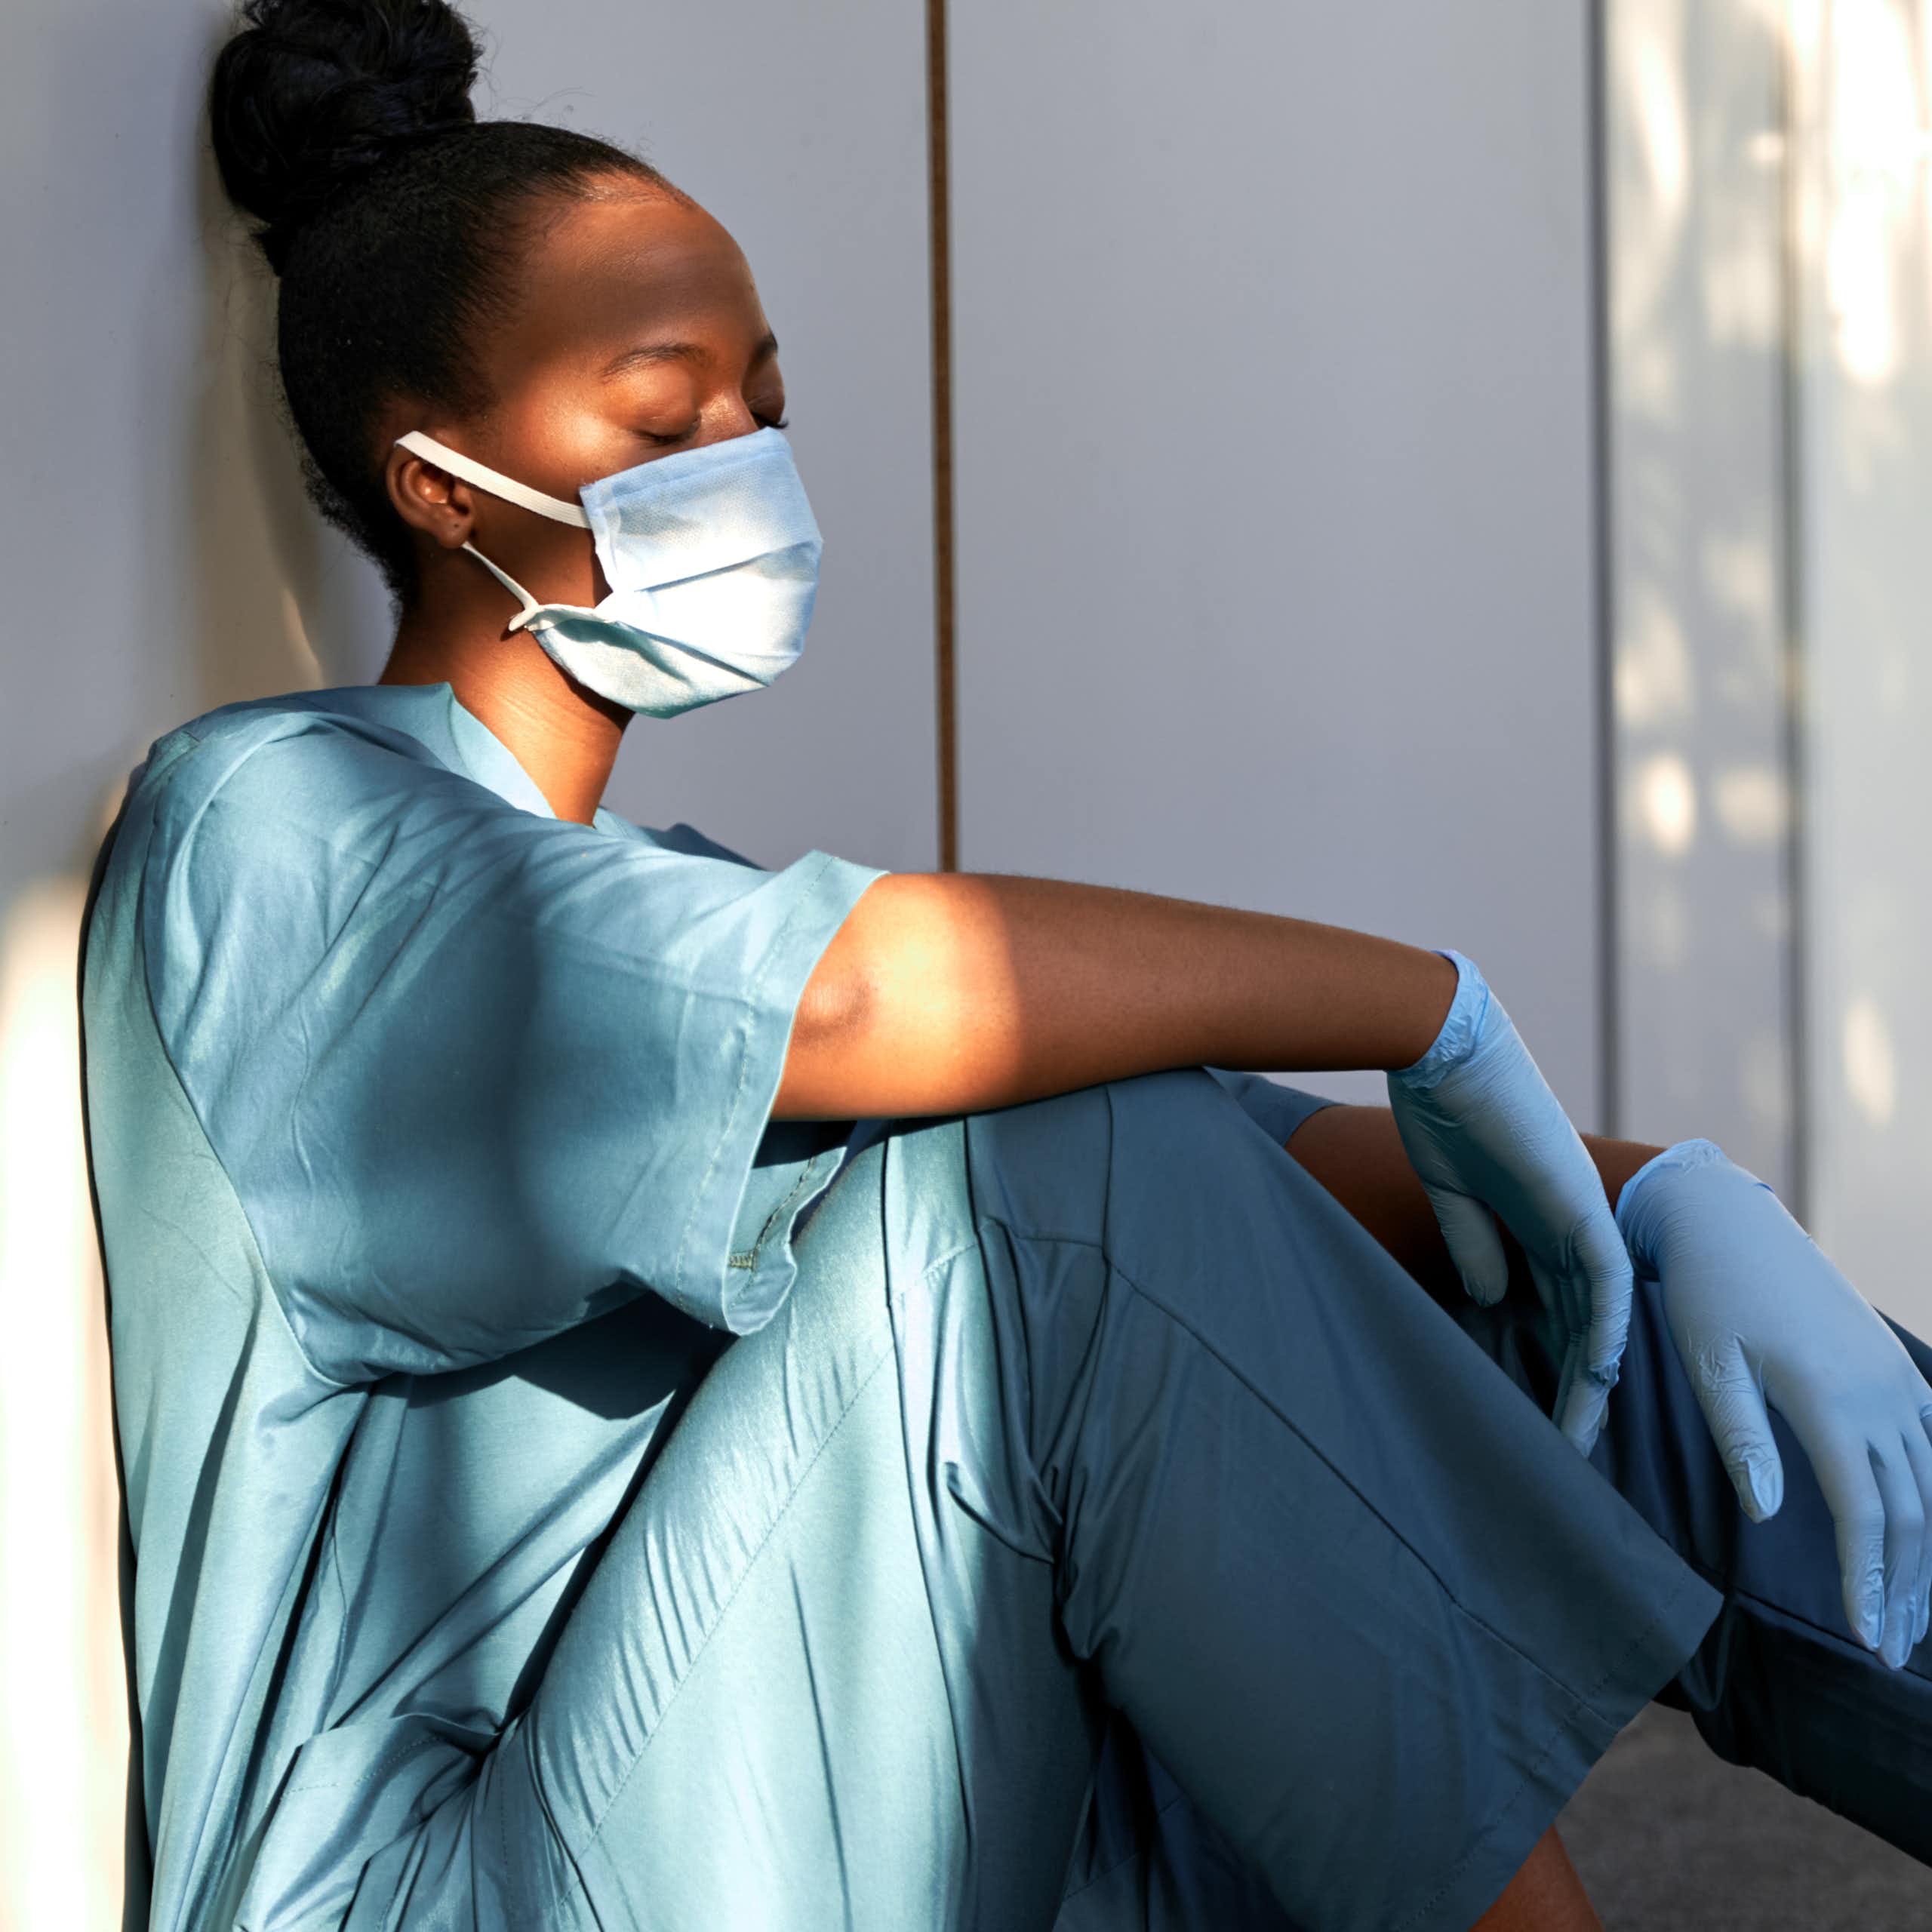 A young, black, female care worker in a face mask and gloves sits on the ground against a wall, looking exhausted